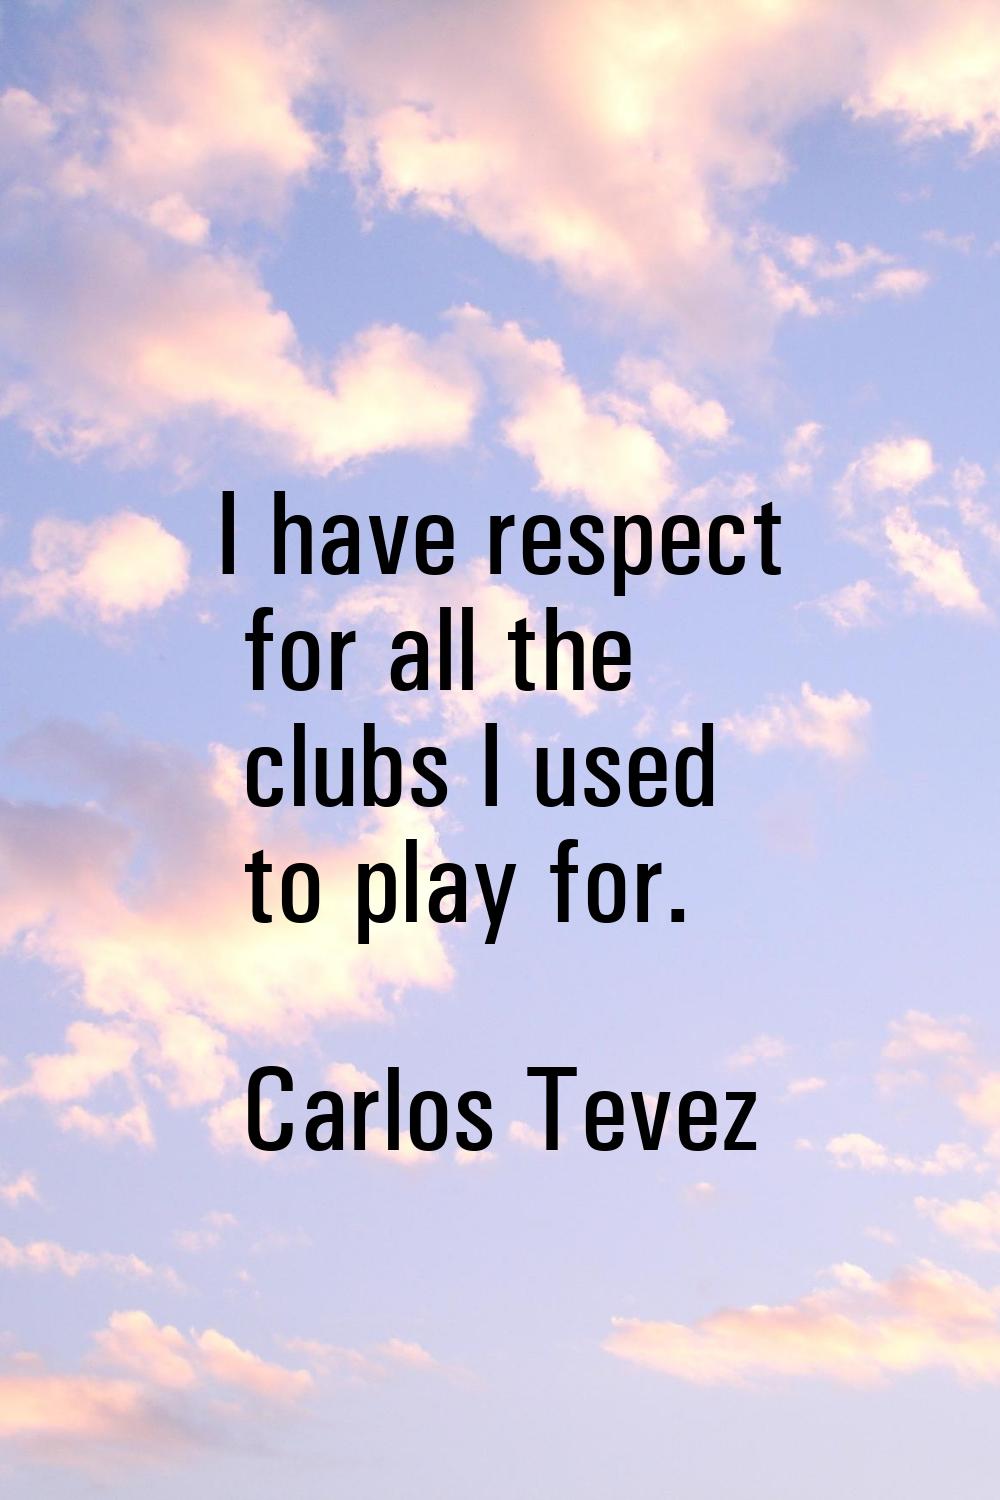 I have respect for all the clubs I used to play for.